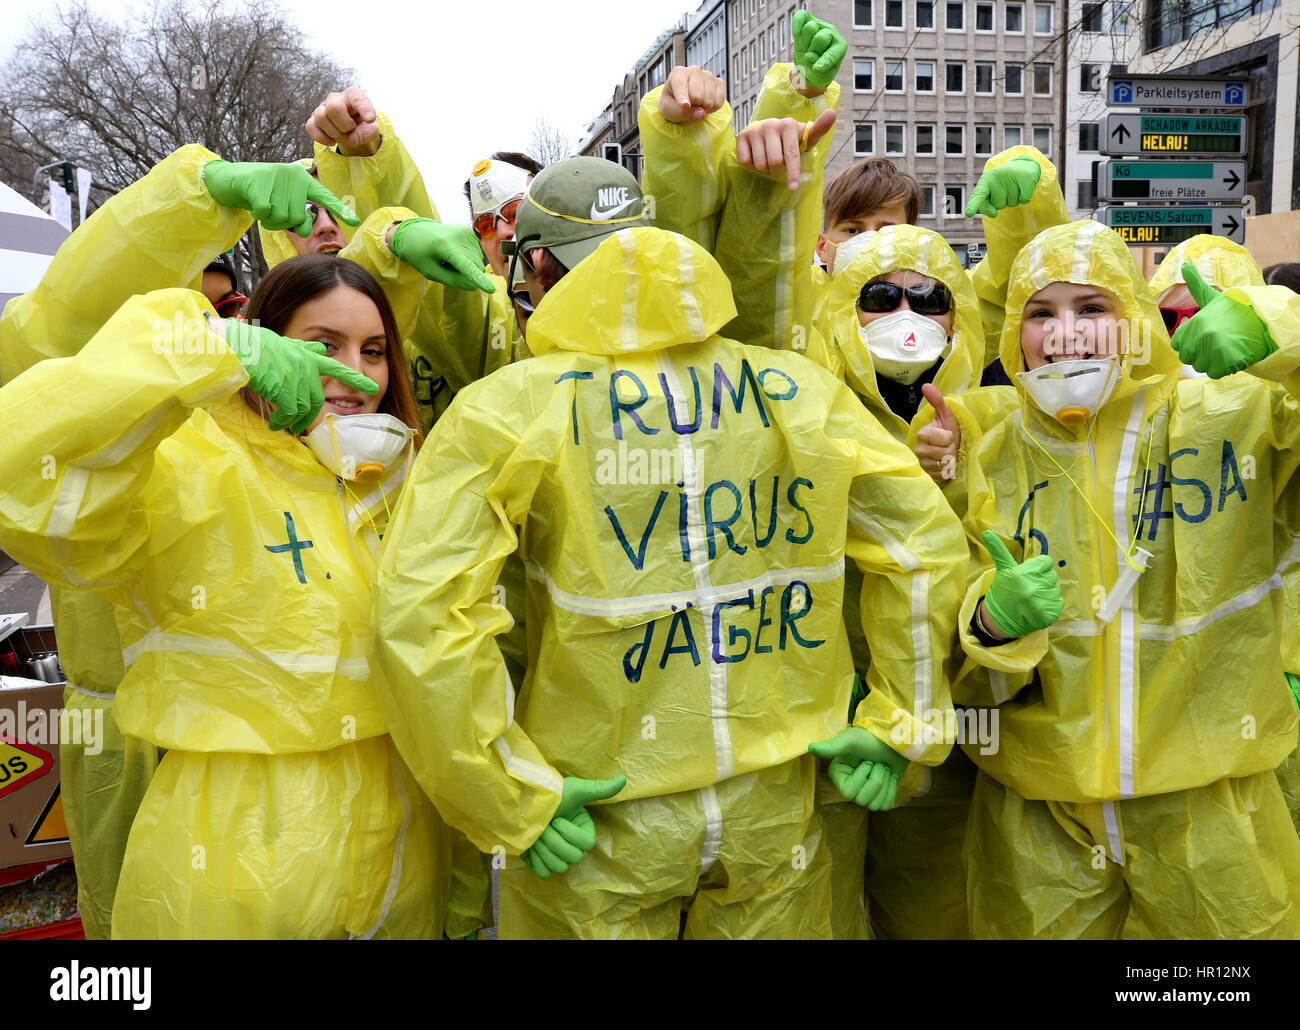 Duesseldorf, Germany. 26th Feb, 2017. 'Trump Virus Jaeger' (lit. 'Trump  Virus Hunters') is written on the costumes of a group of young people at  the carnival parade in Duesseldorf, Germany, 26 February